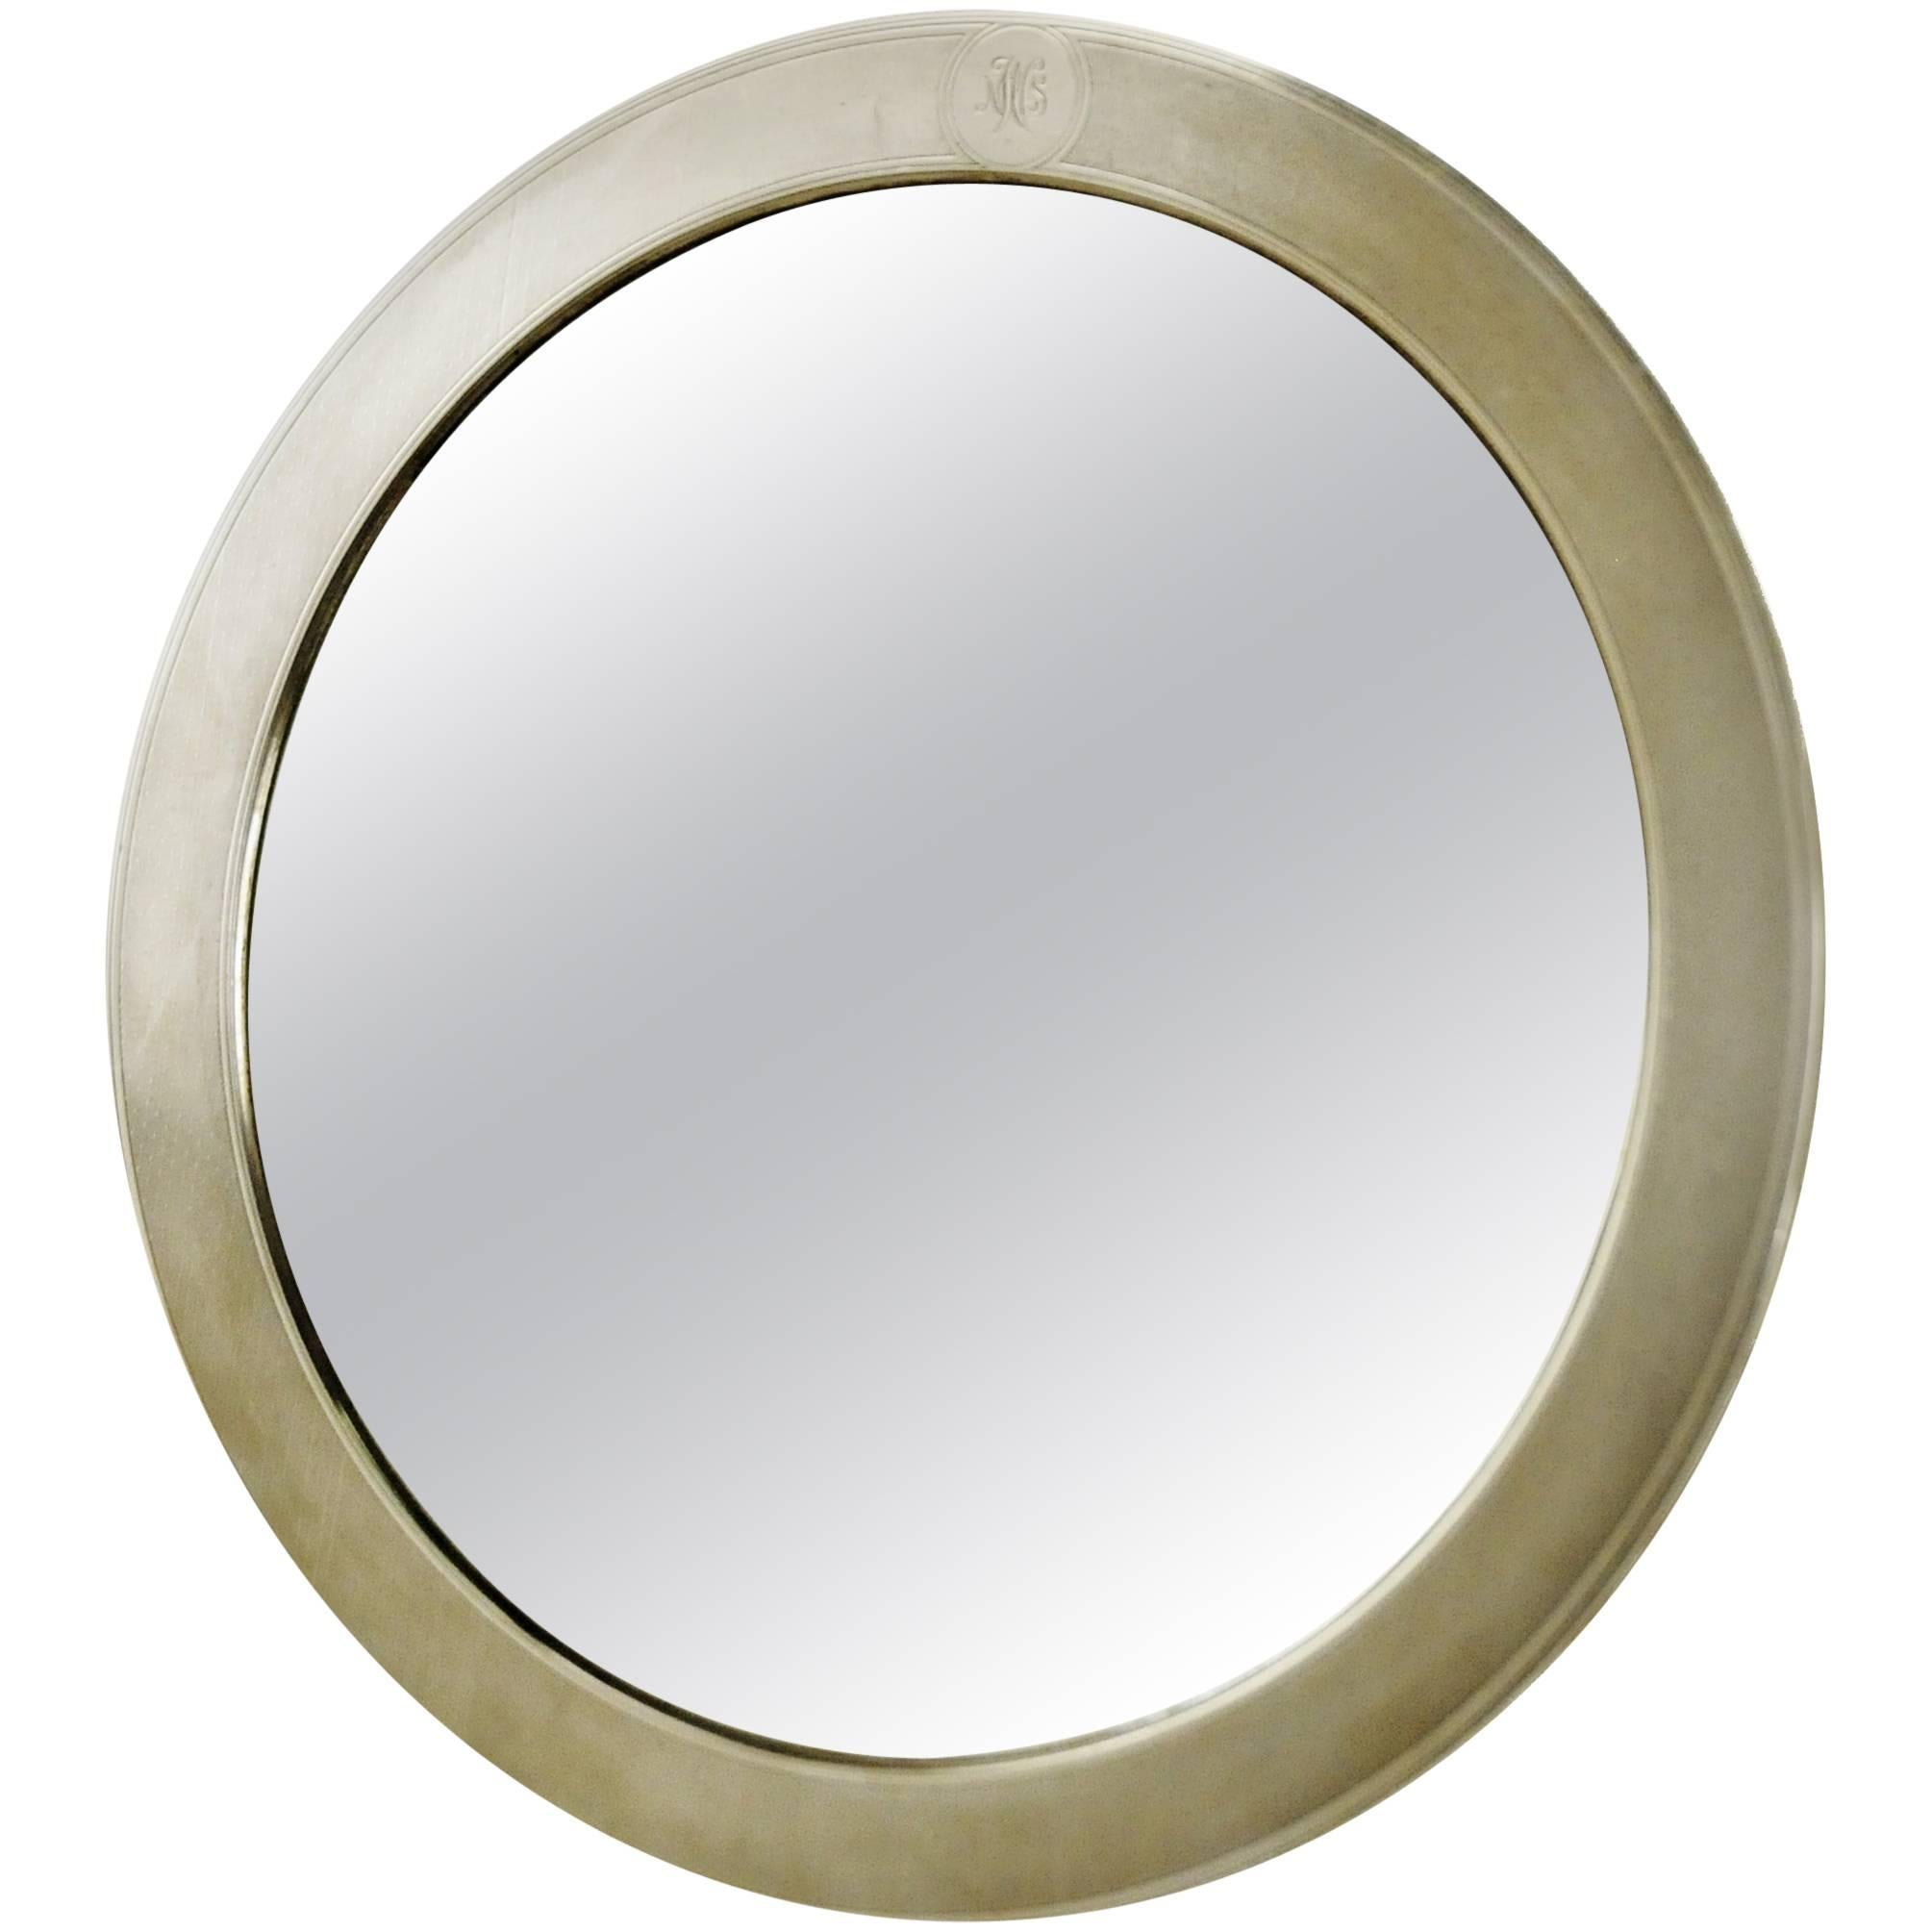 Tiffany & Co., American Art Deco, Sterling Silver Table Mirror, 1920s For Sale